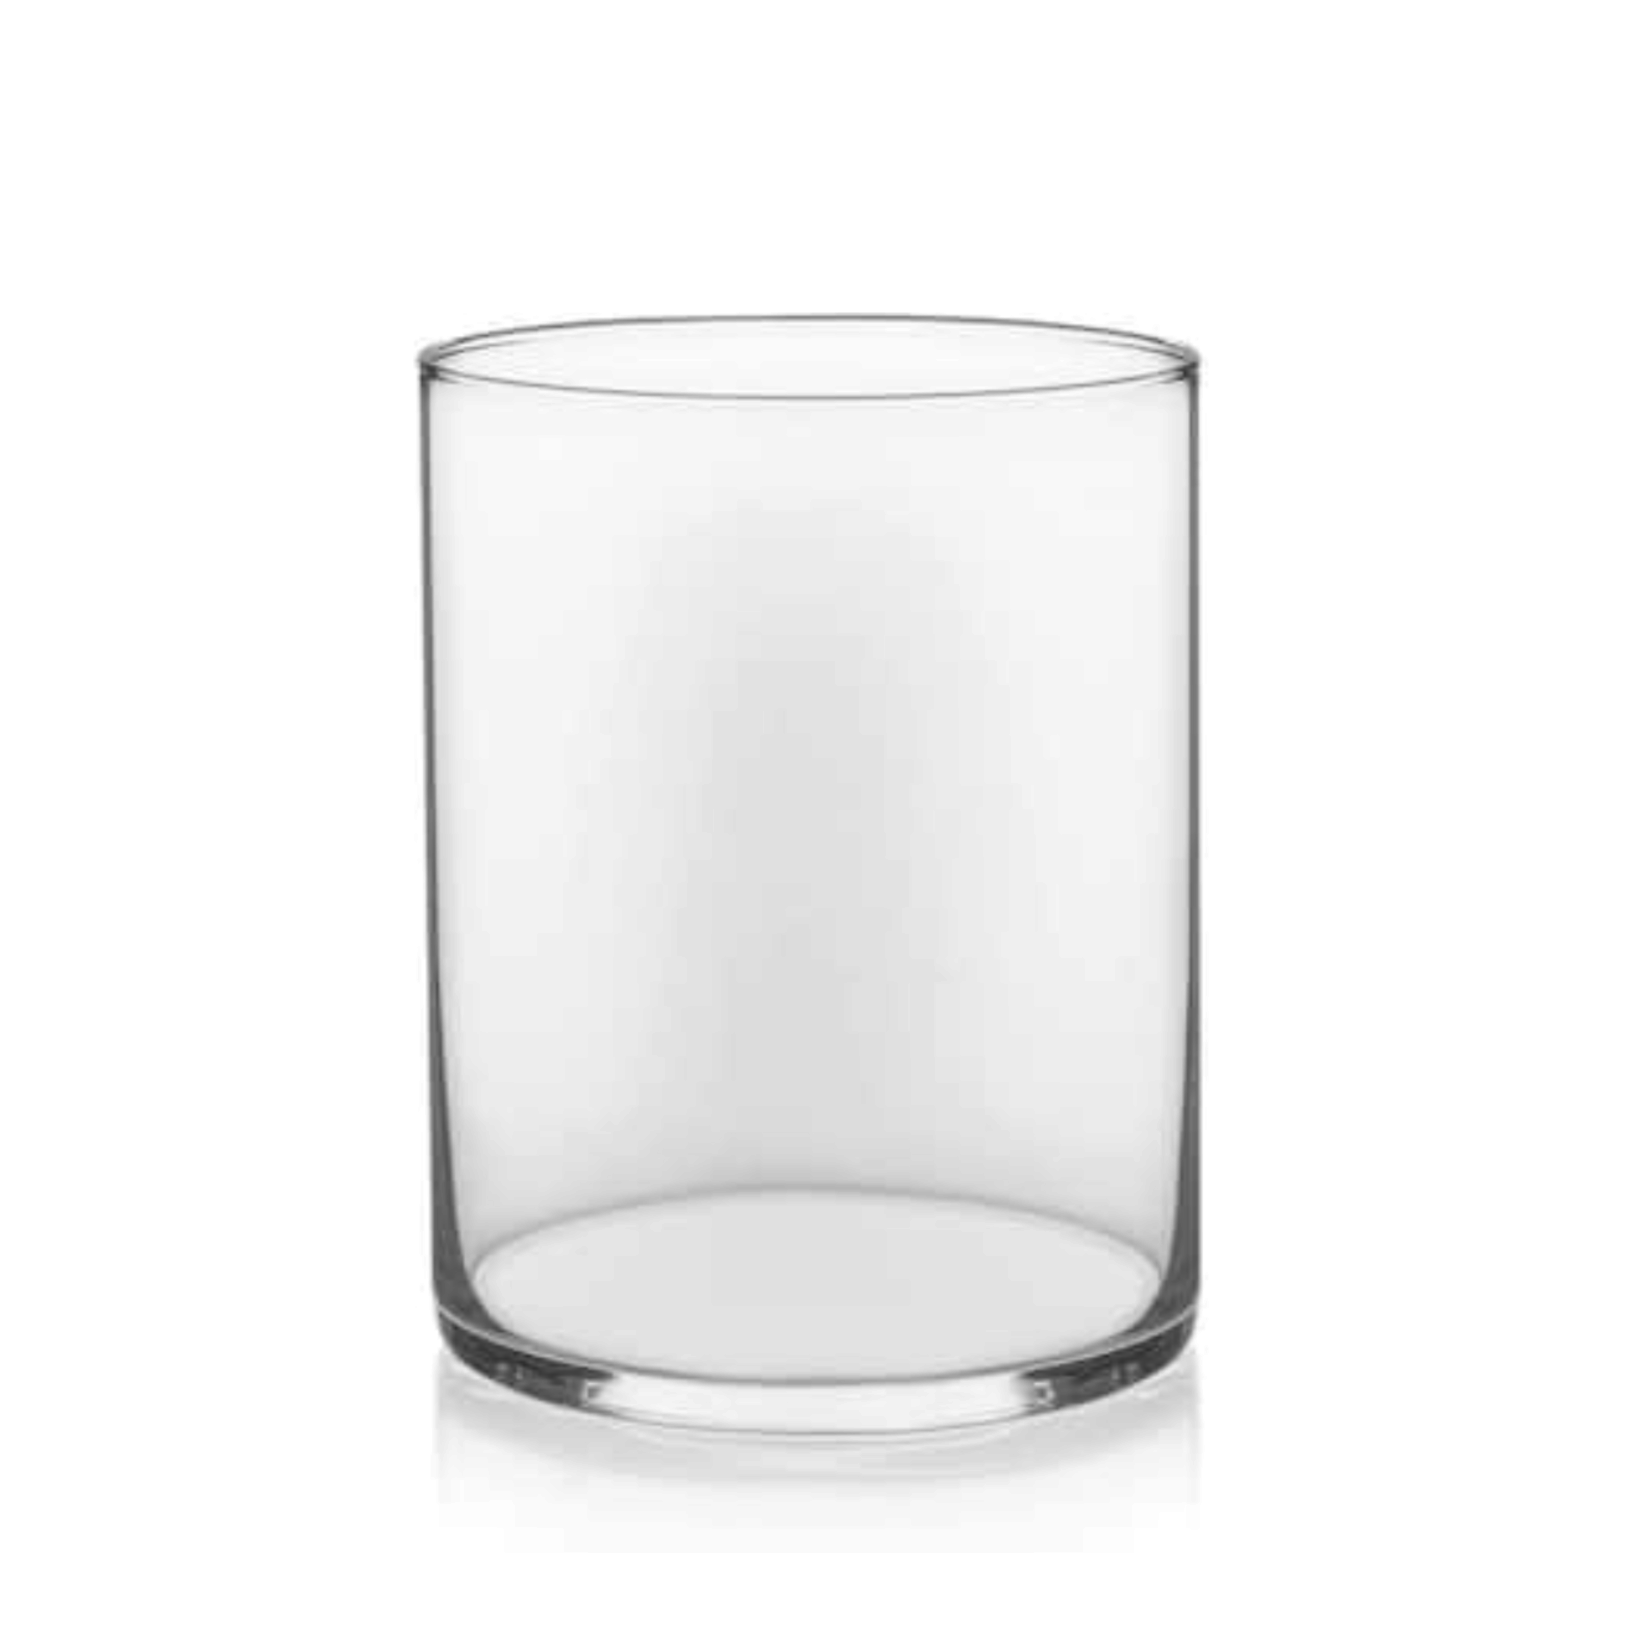 4"H X 3" CLEAR GLASS VASE CYLINDER